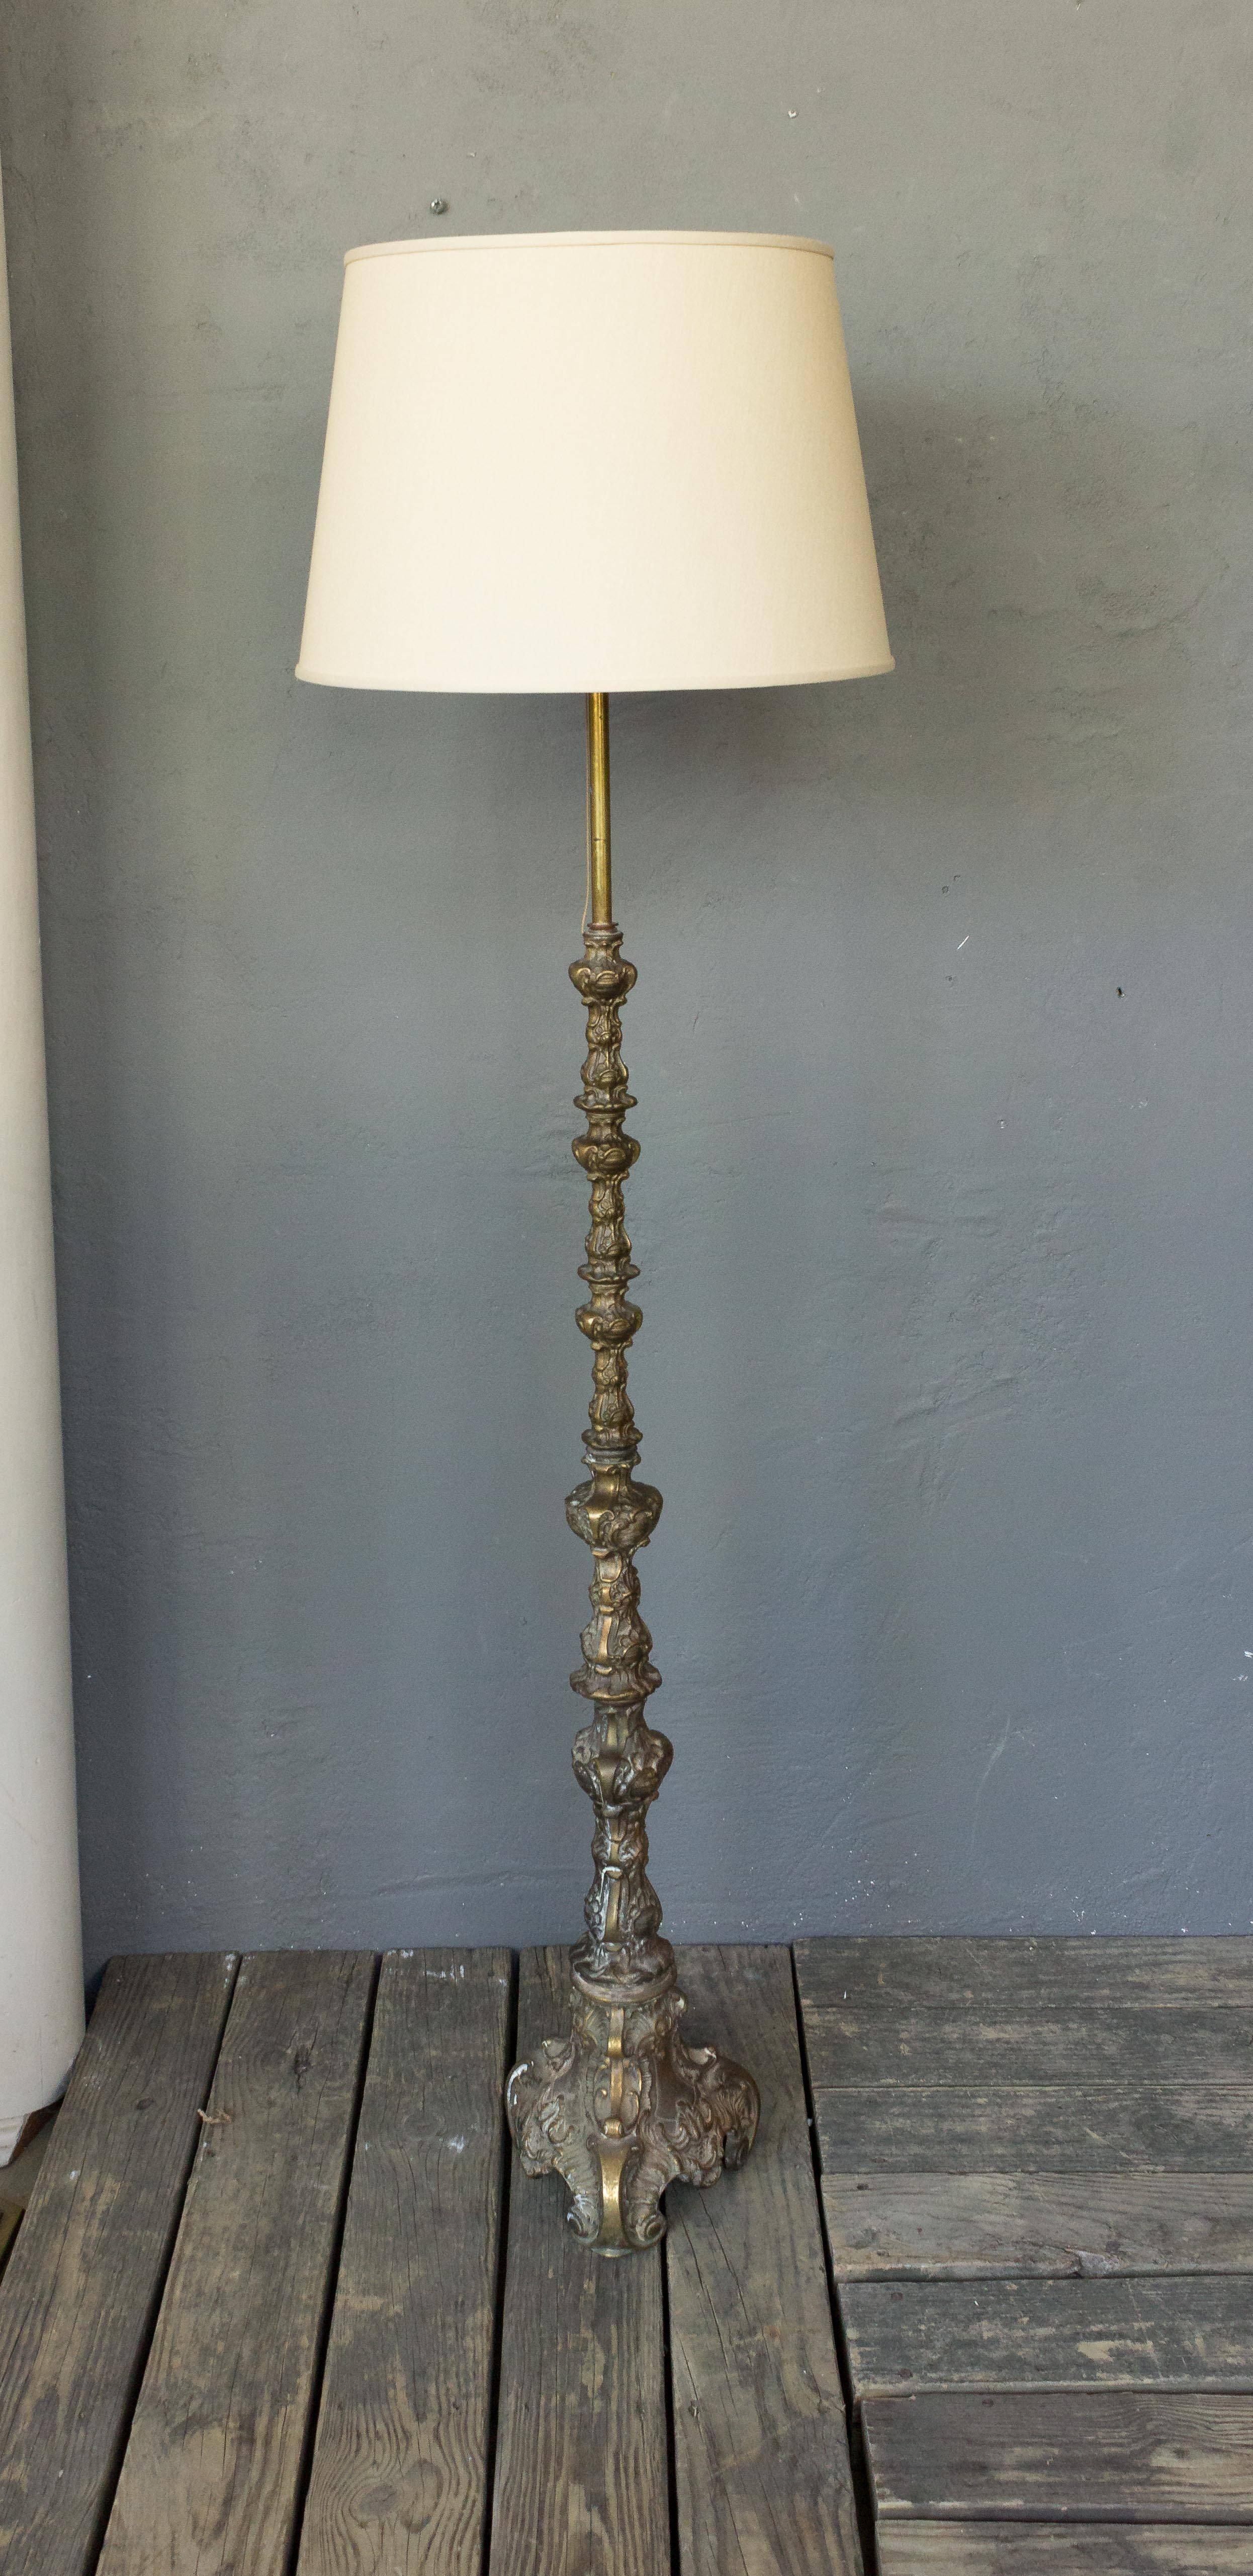 A ornate and  well made bronze and brass floor lamp

Price includes polishing or plating and new wiring. Please allow 2 to 3 weeks for completion. Not sold with shade.

